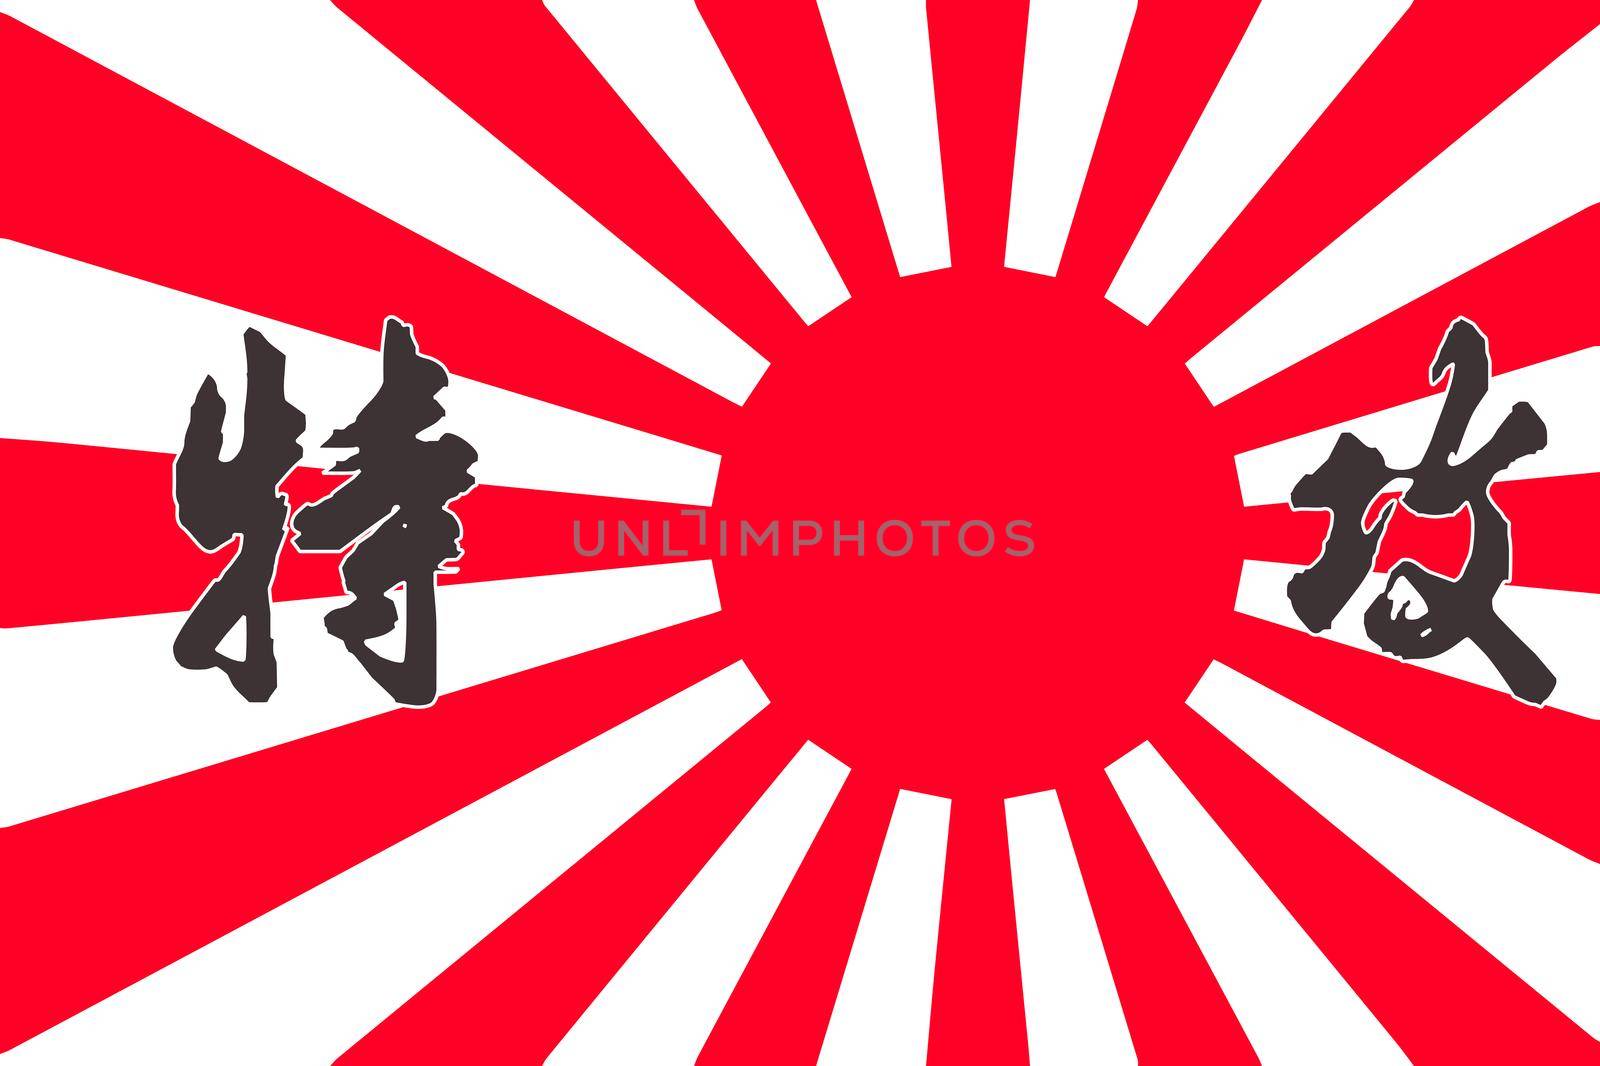 The rising sun Japanese flag in red and whitewith Kamikaze japanese text